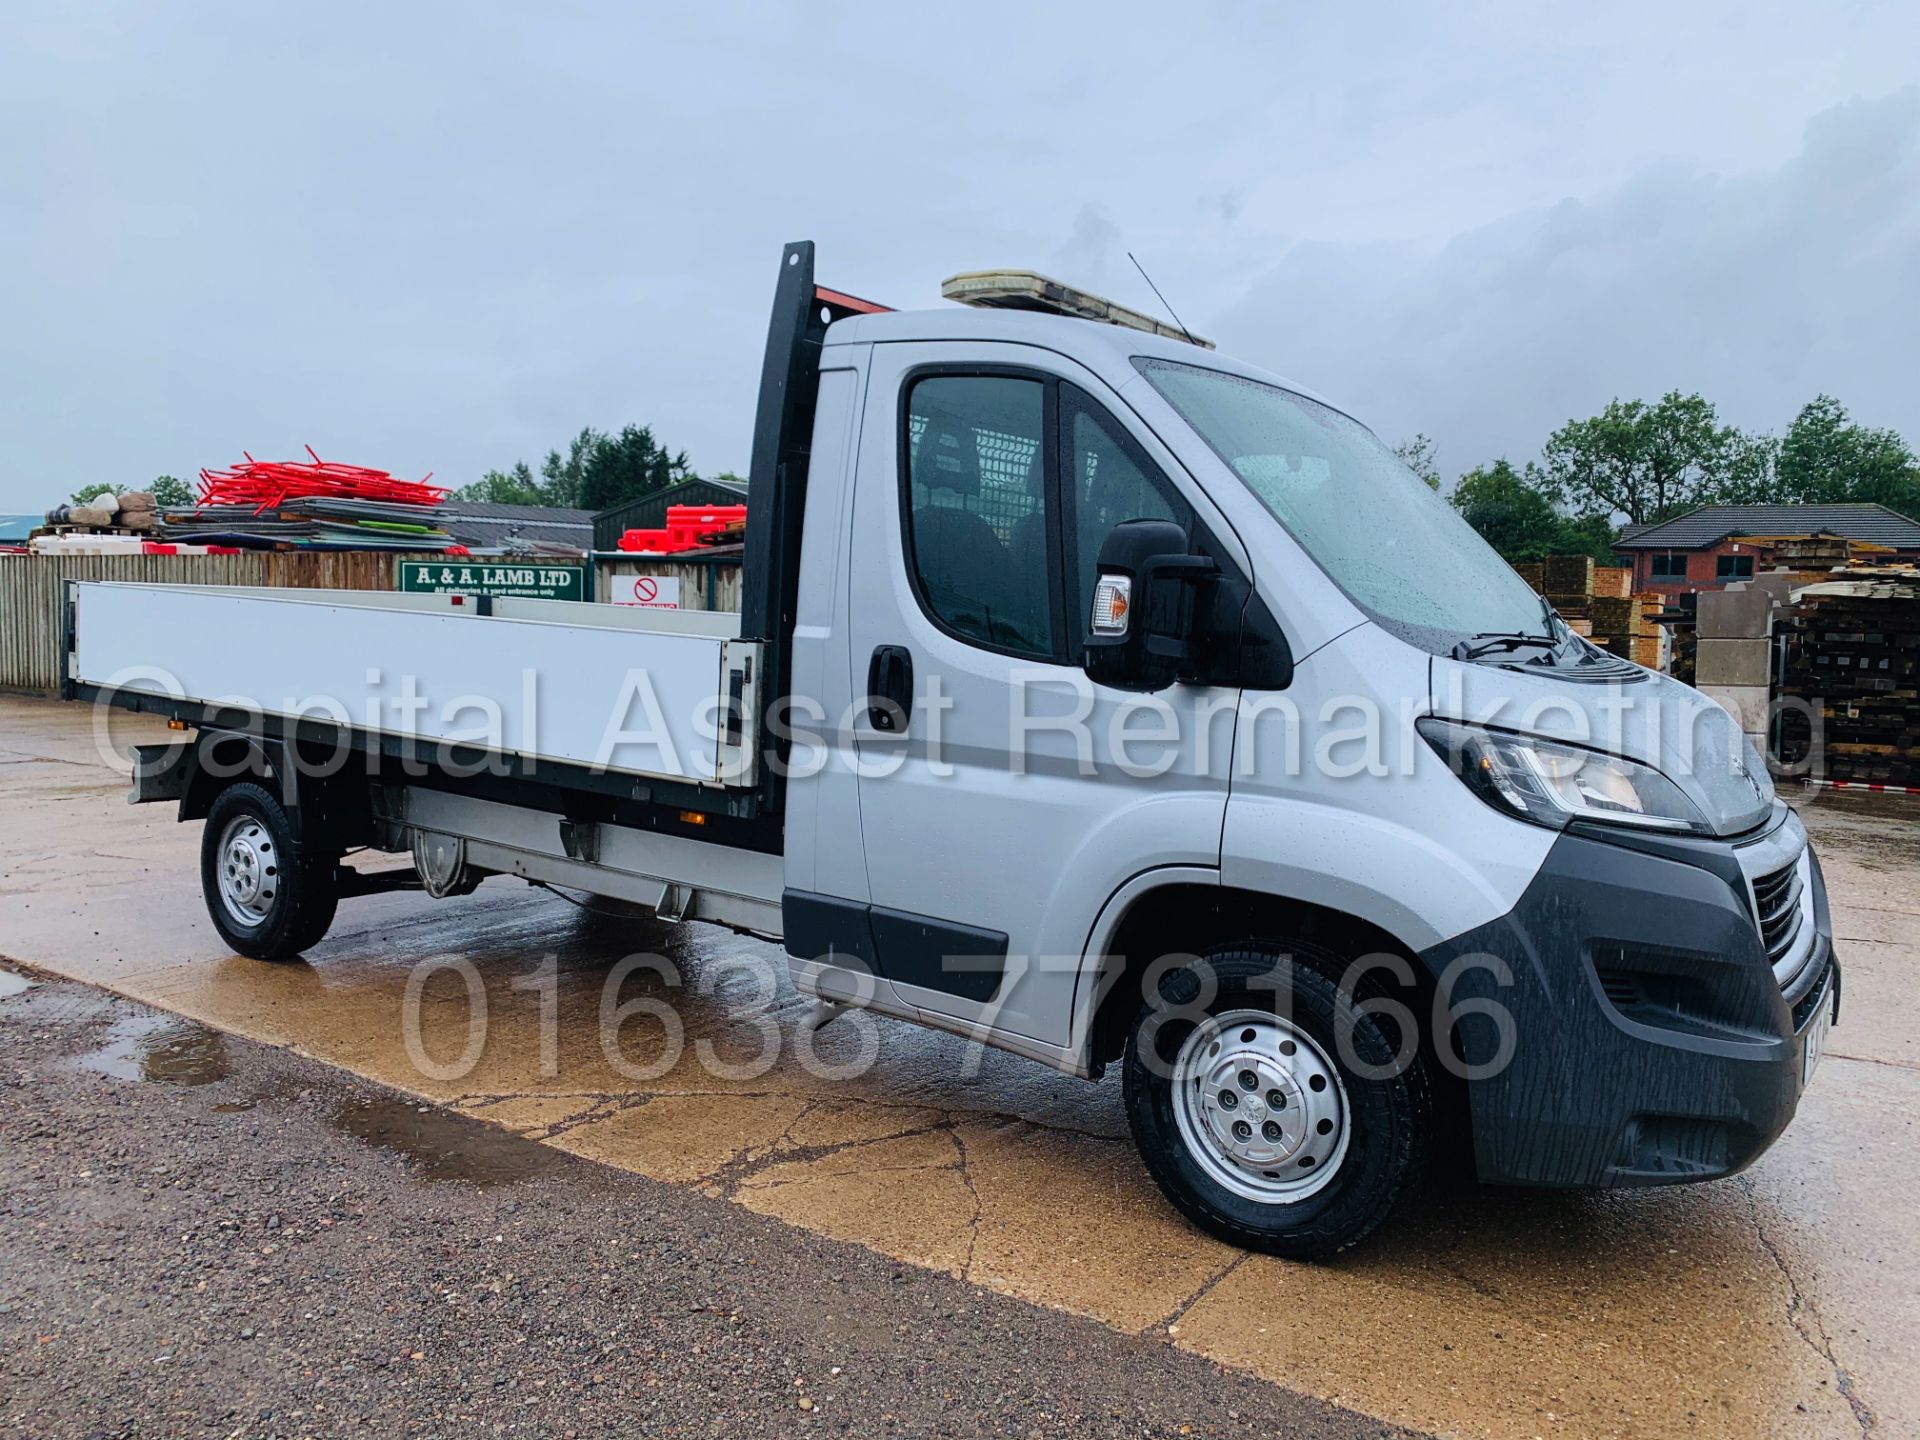 (On Sale) PEUGEOT BOXER 335 *LWB - DROPSIDE TRUCK* (2017 - EURO 6) '2.0 BLUE HDI -130 BHP - 6 SPEED'